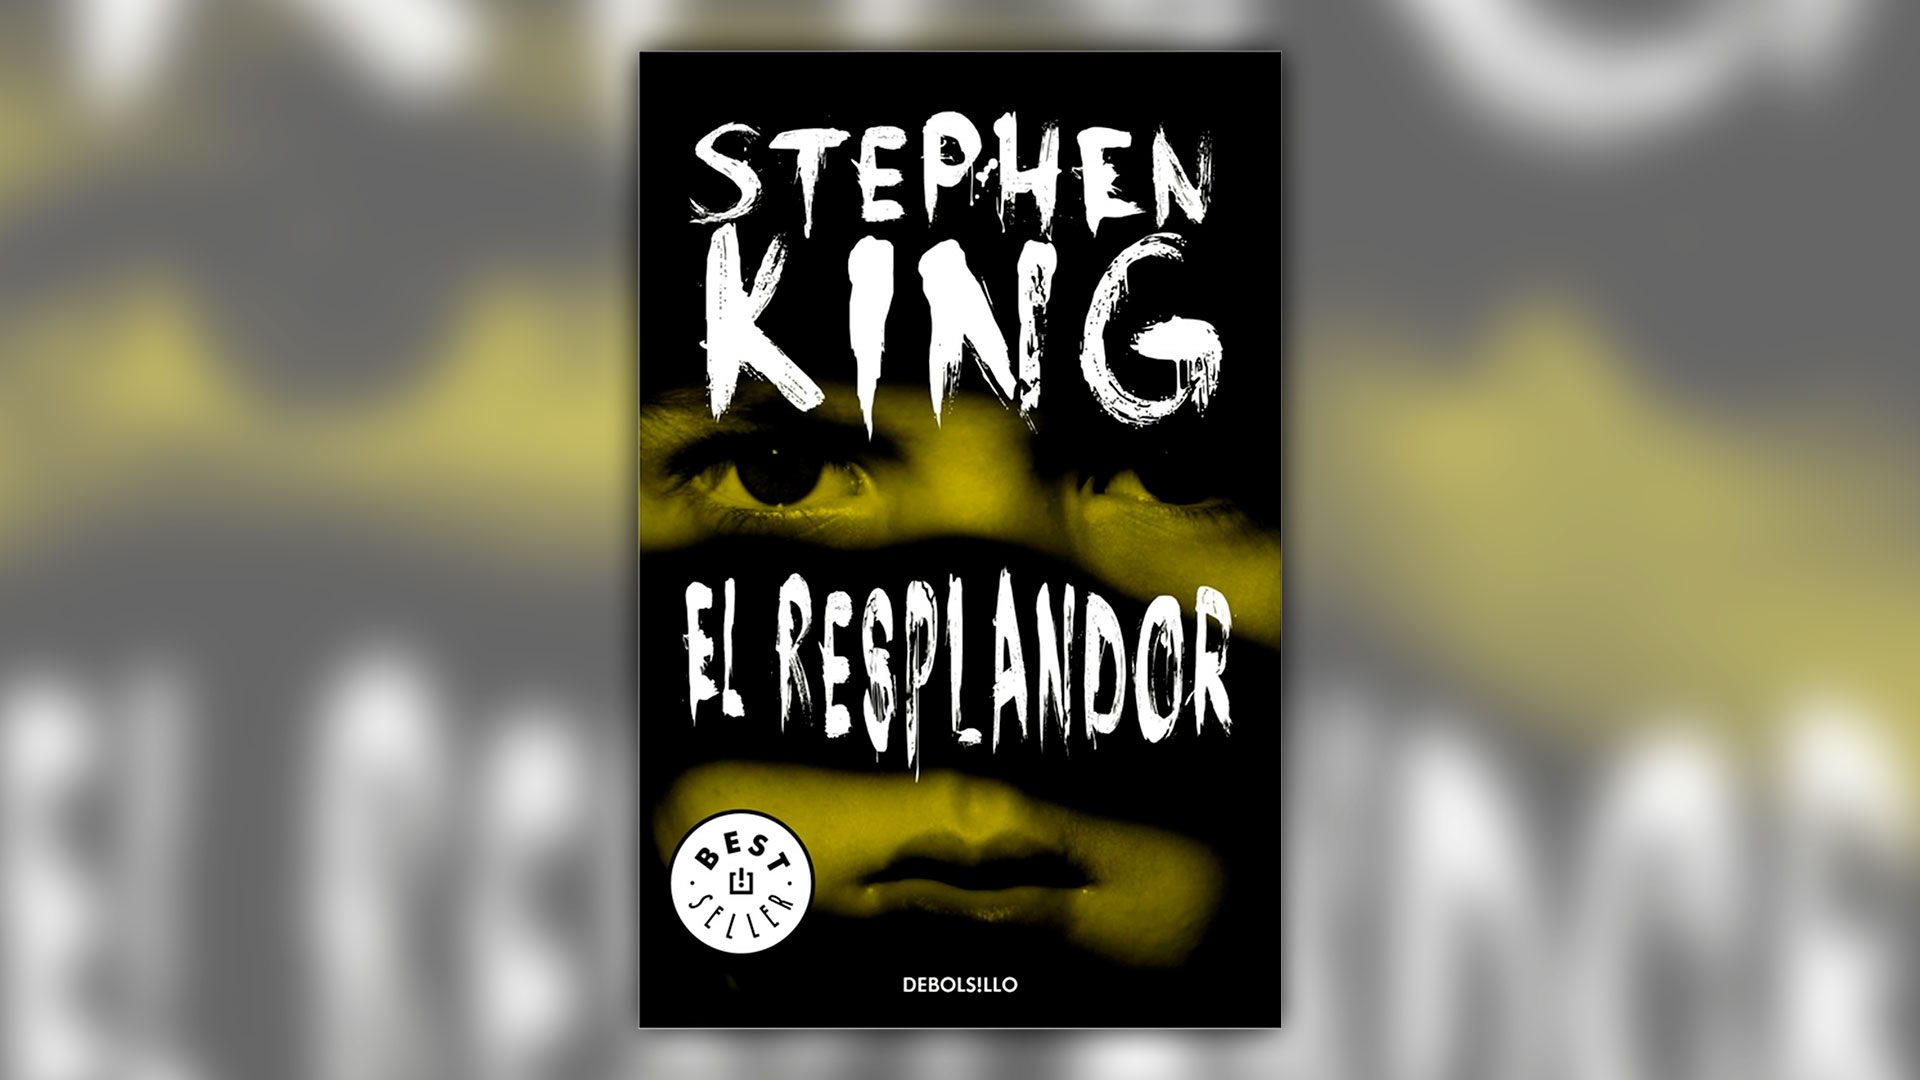 "The glow"by Stephen King.